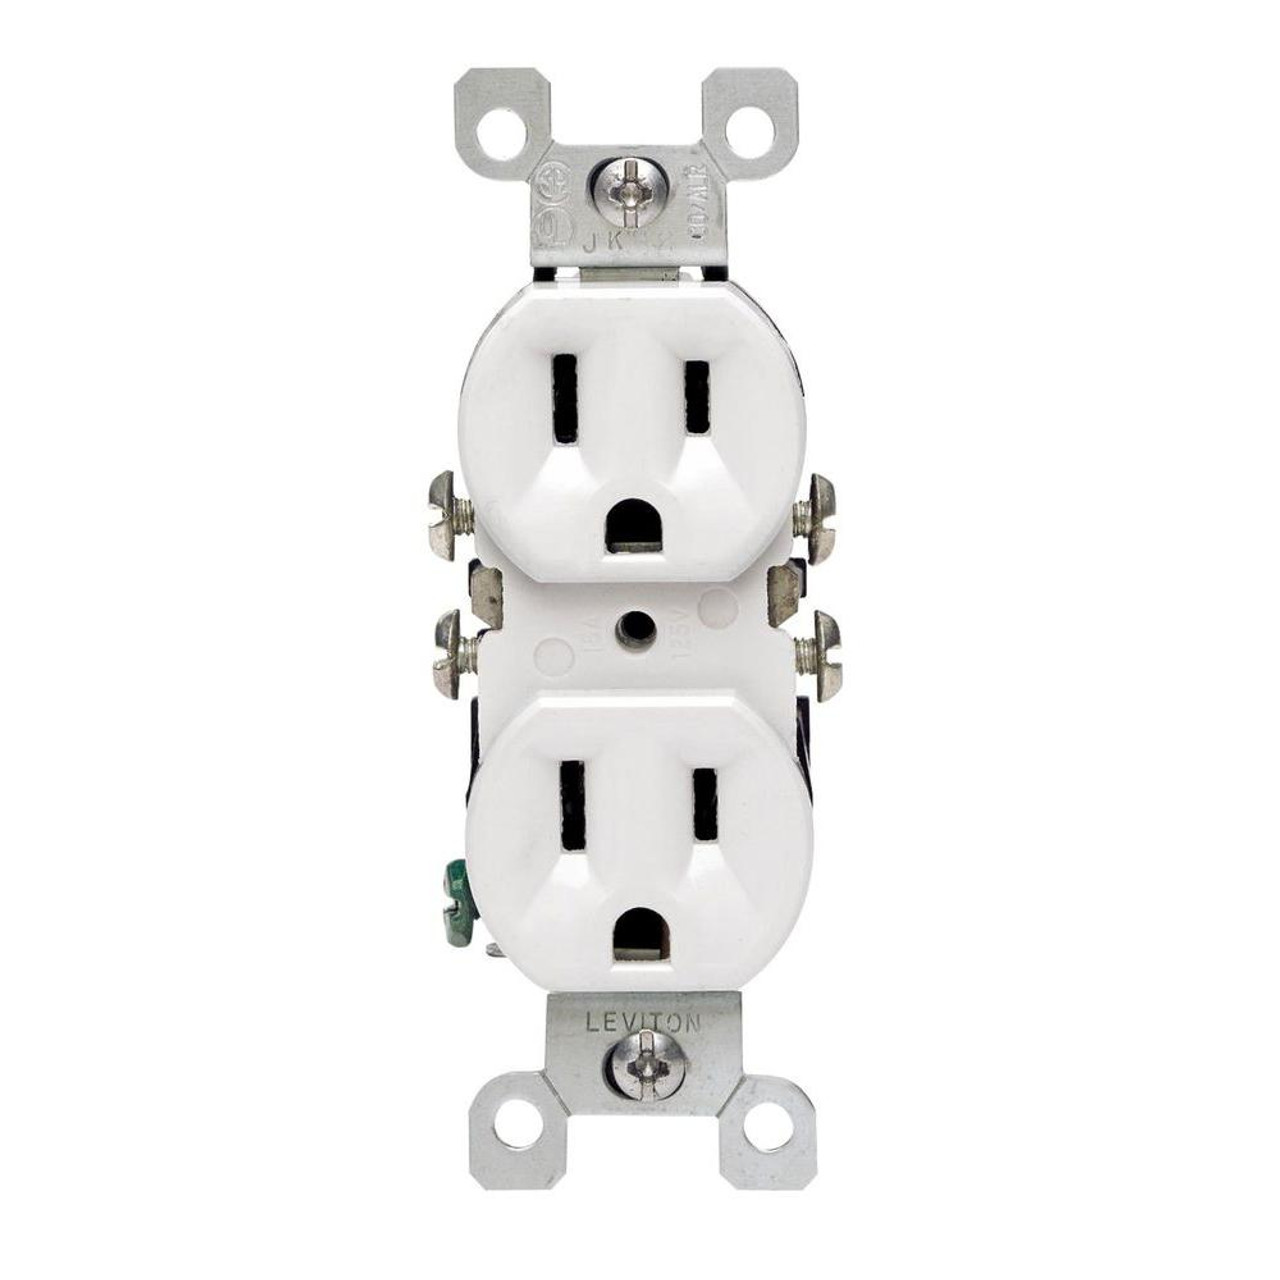 Co/Alr Duplex Receptacle 15A 125V, White - TremTech Electrical Systems